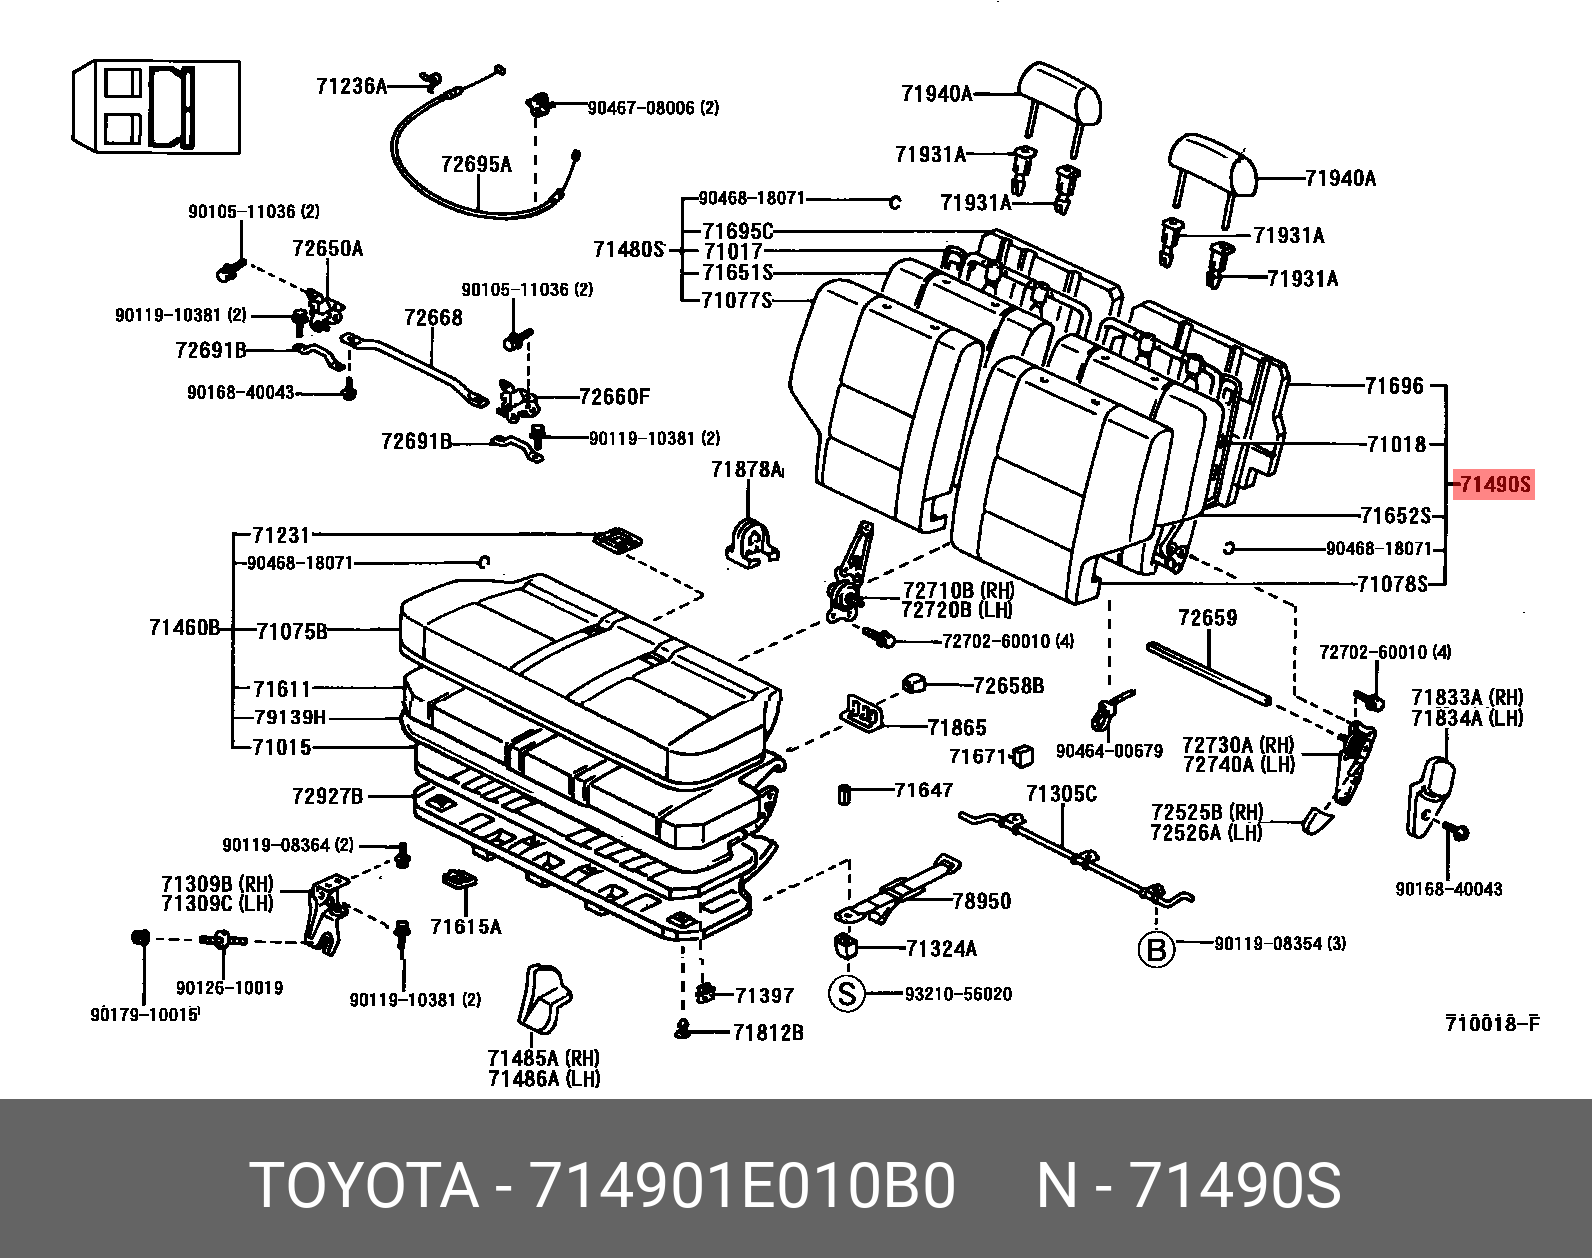 COROLLA 199106 - 200206, BACK ASSY, REAR SEAT, LH (FOR SEPARATE TYPE)